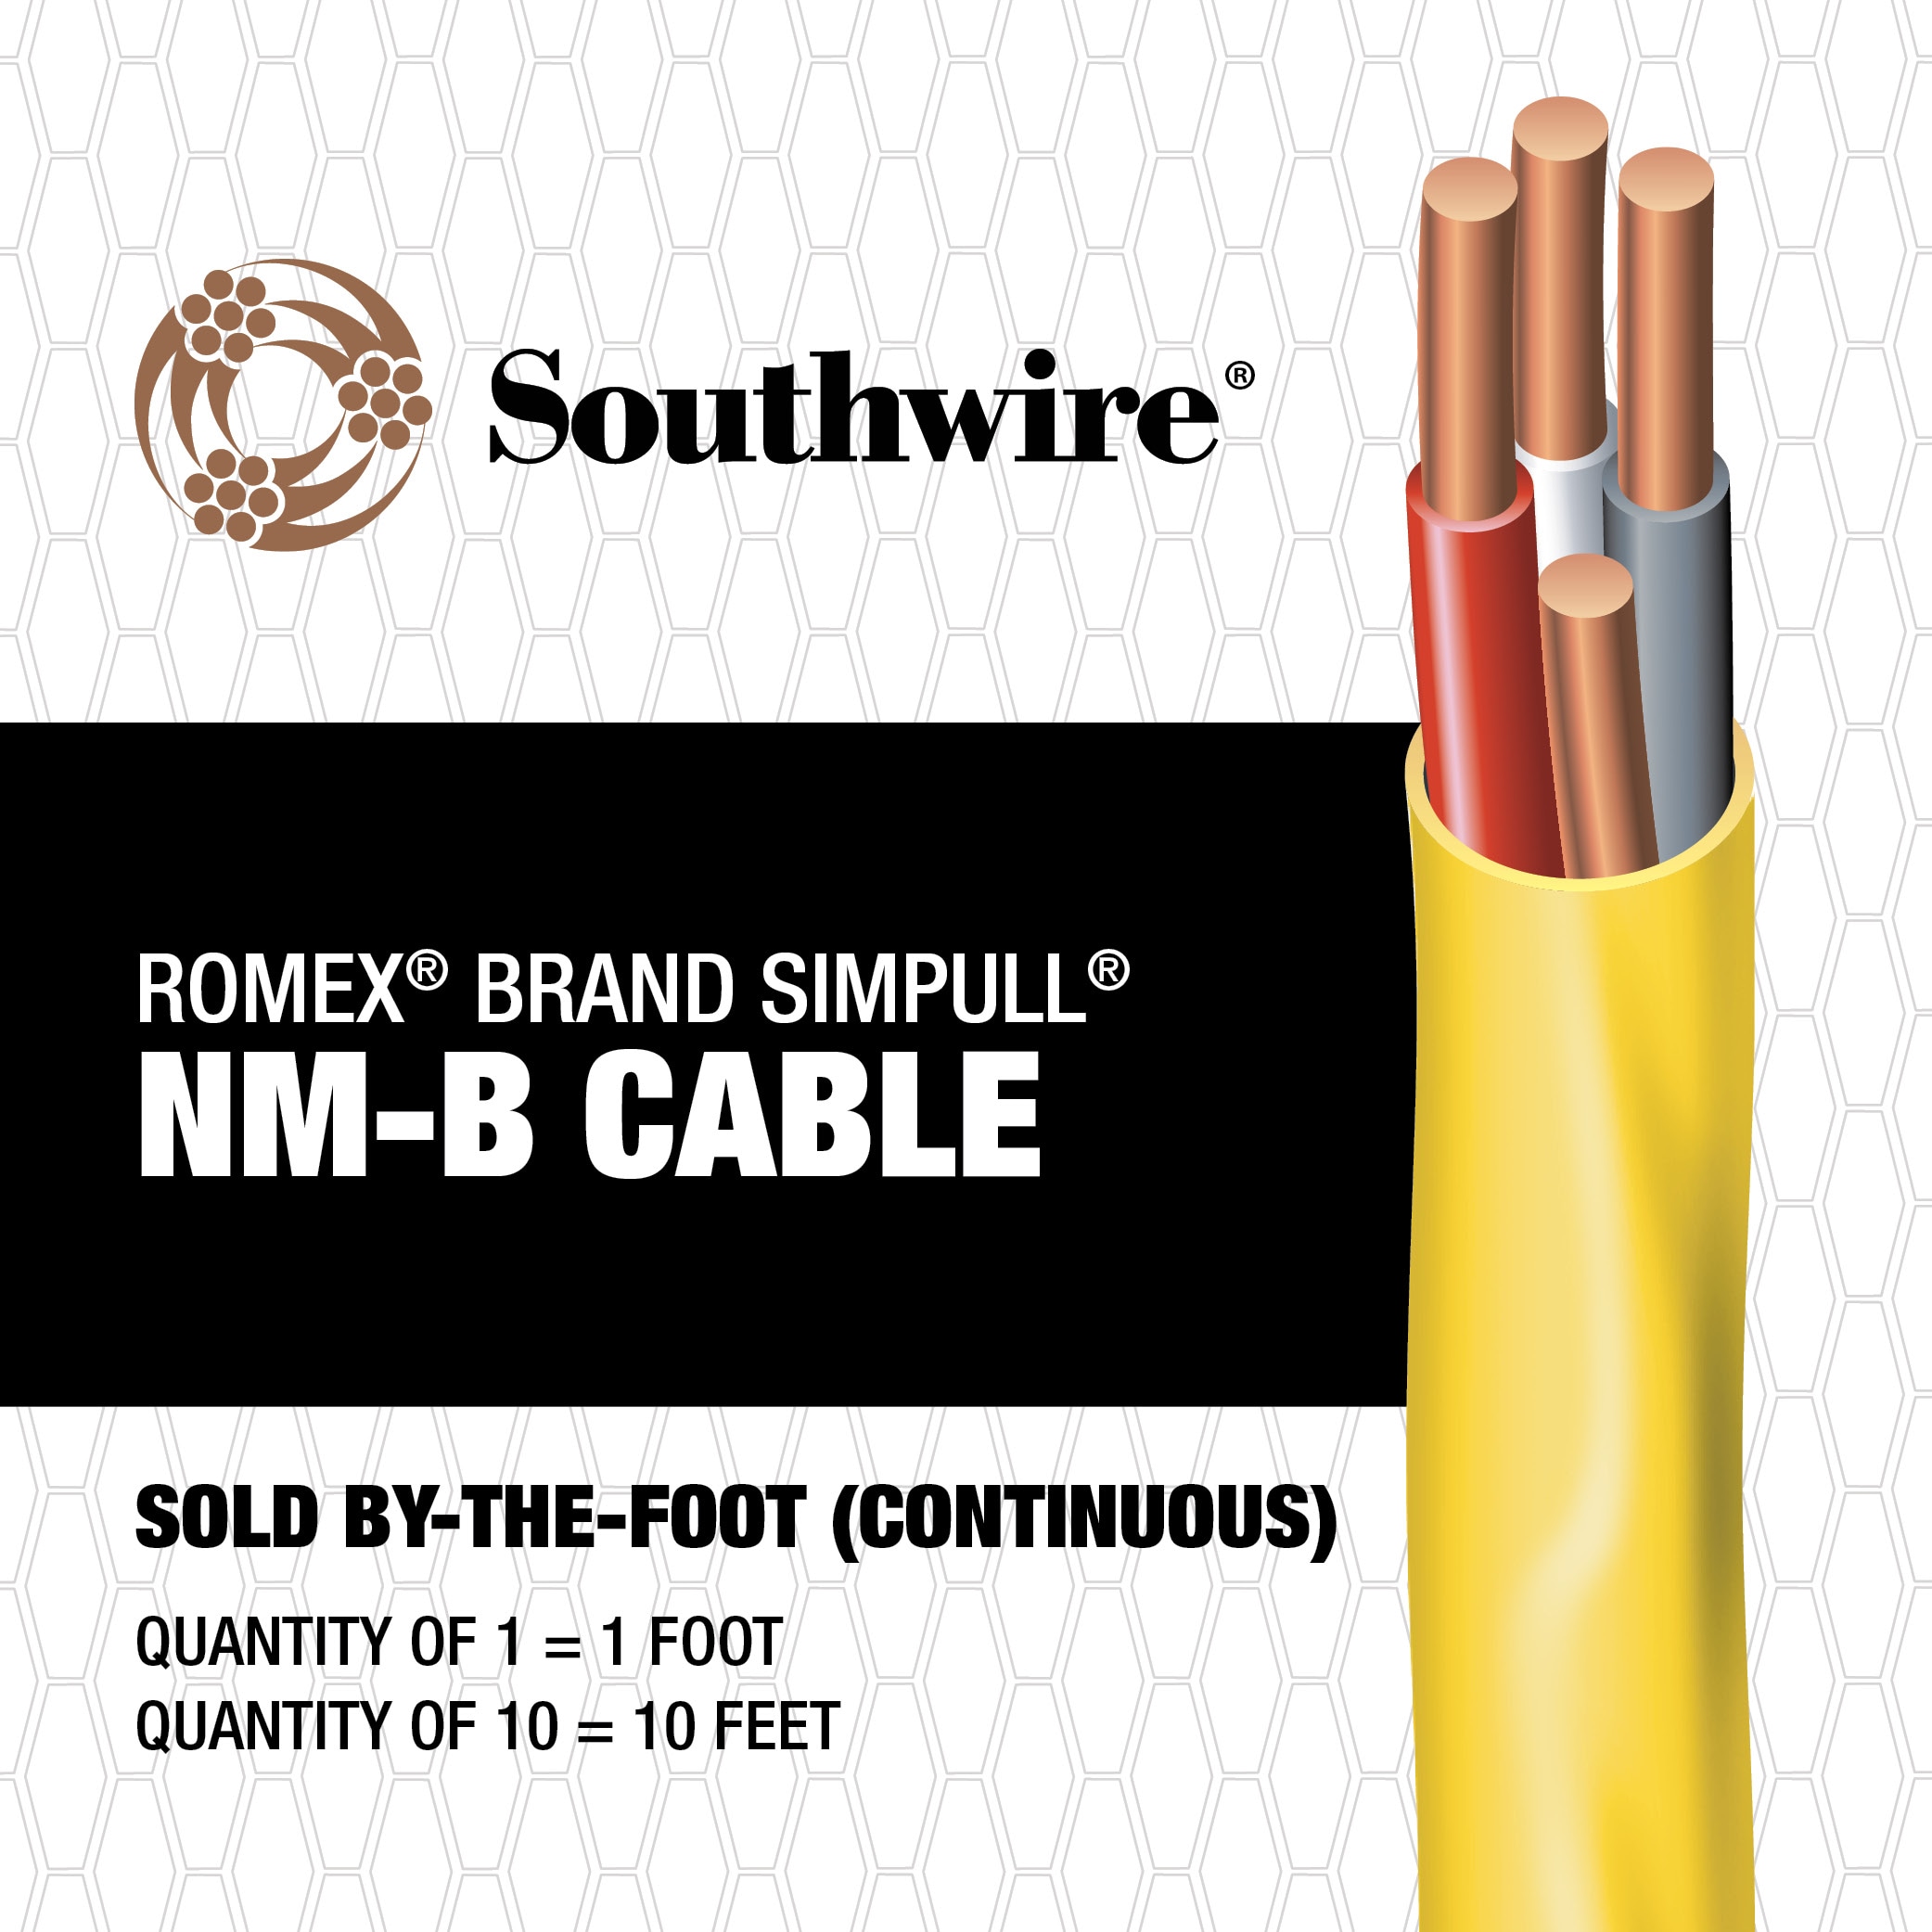 Southwire 6/3 Romex SIMpull Stranded Indoor Non-Metallic Wire (By-the-foot)